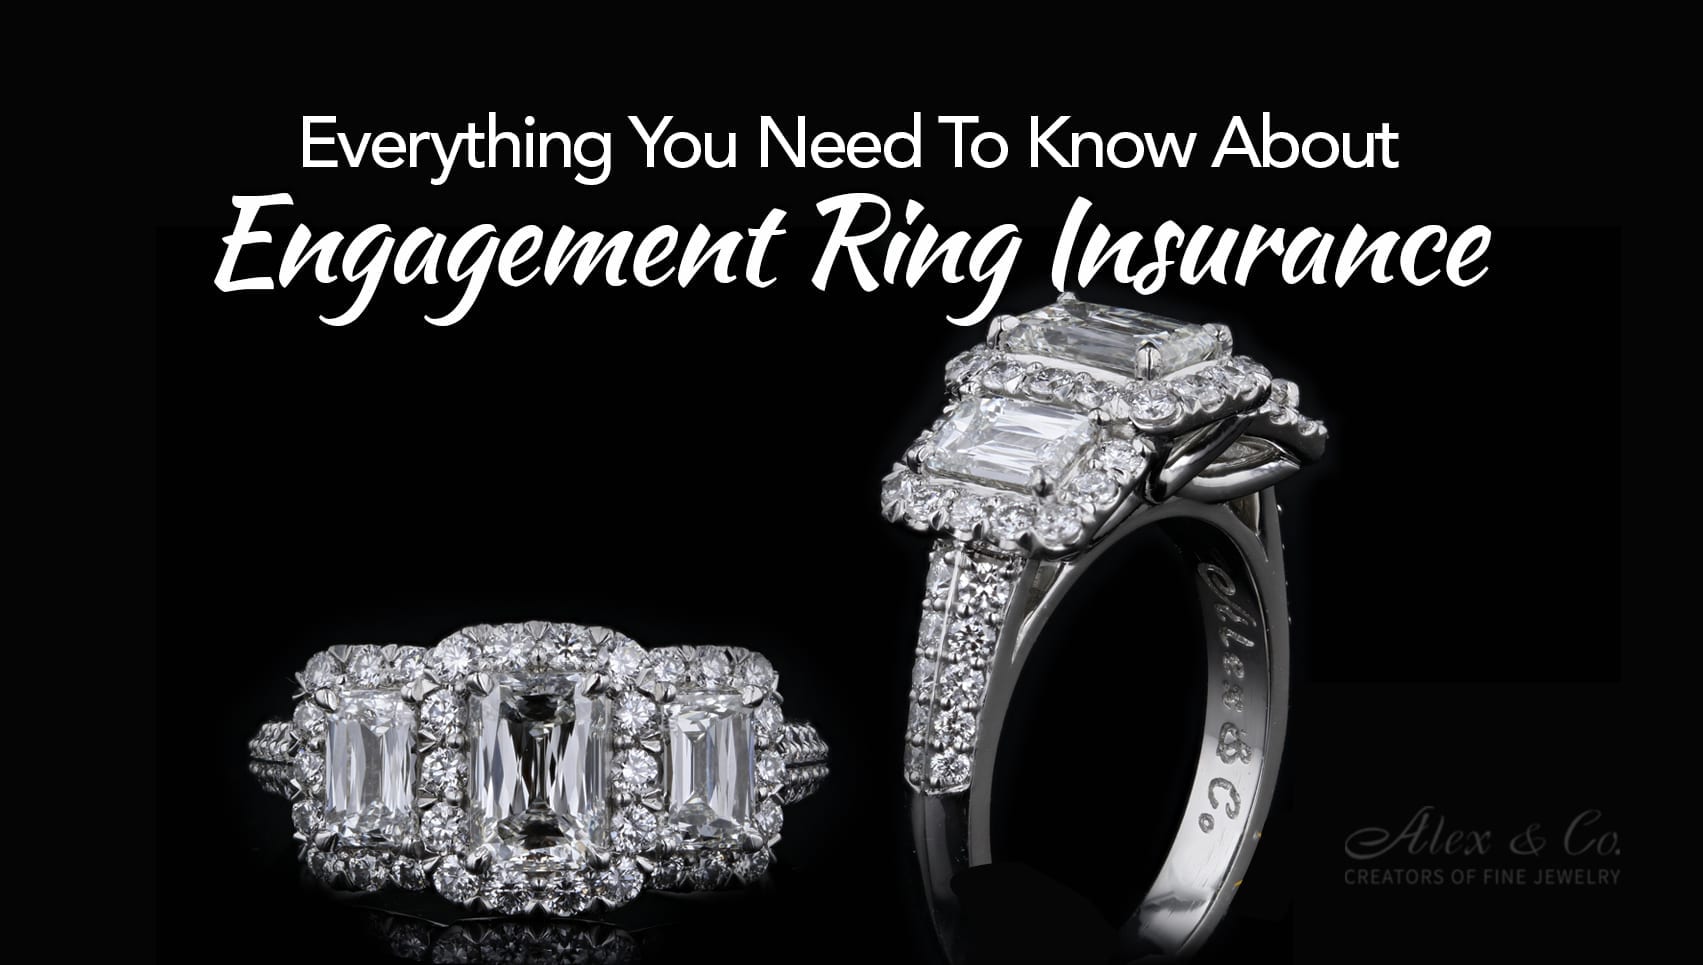 Everything You Need To Know About Engagement Ring Insurance featured image update 1